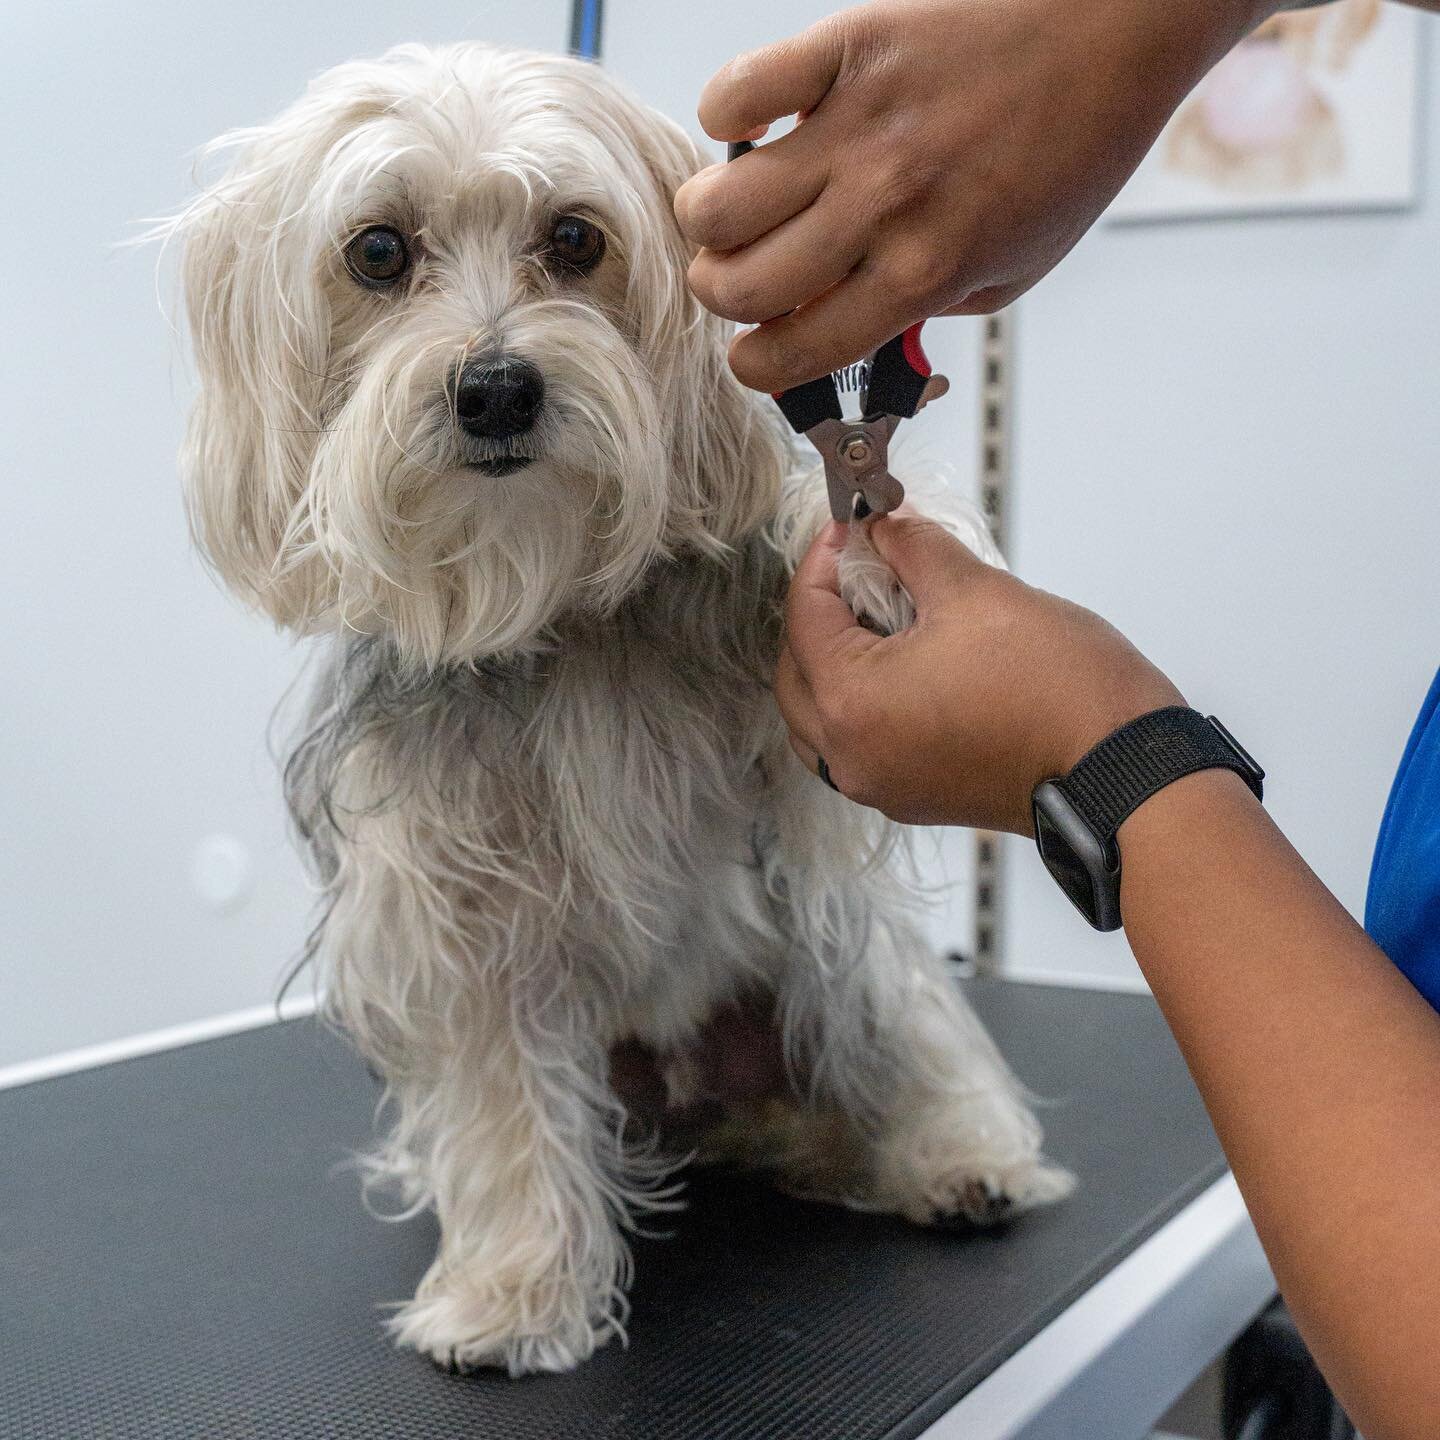 Trimming your dog&rsquo;s nails is an important grooming task that helps them stay happy and healthy✨🐾 #4pets #4petsgrooming #altamontesprings #altamontespringsgroomer #orlandogroomer #petgroomingcentalflorida #centralfloridagroomer